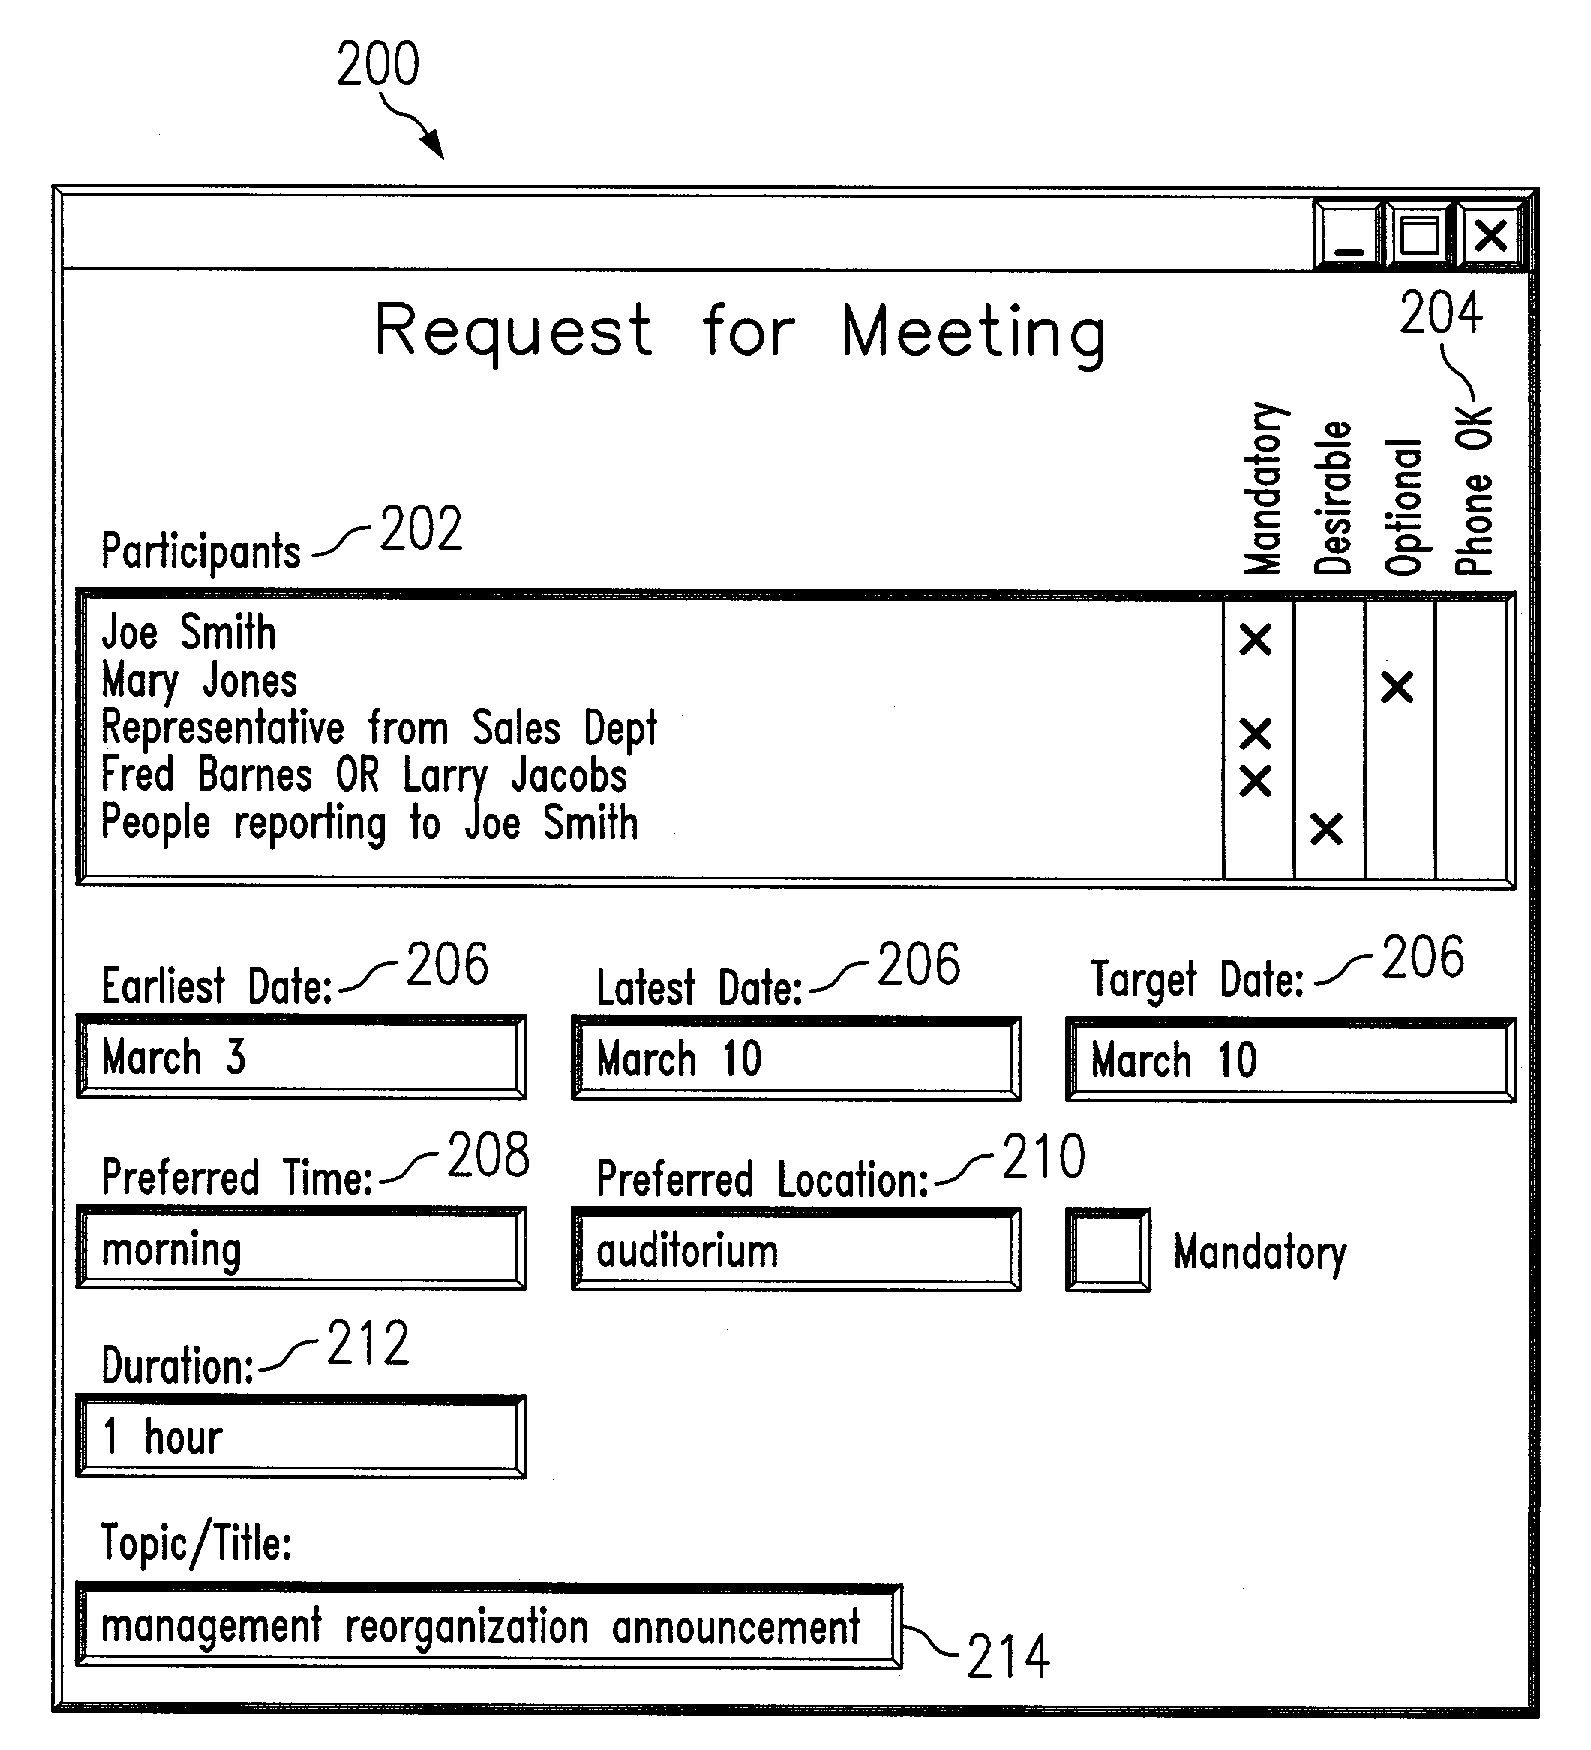 Event scheduling with optimization